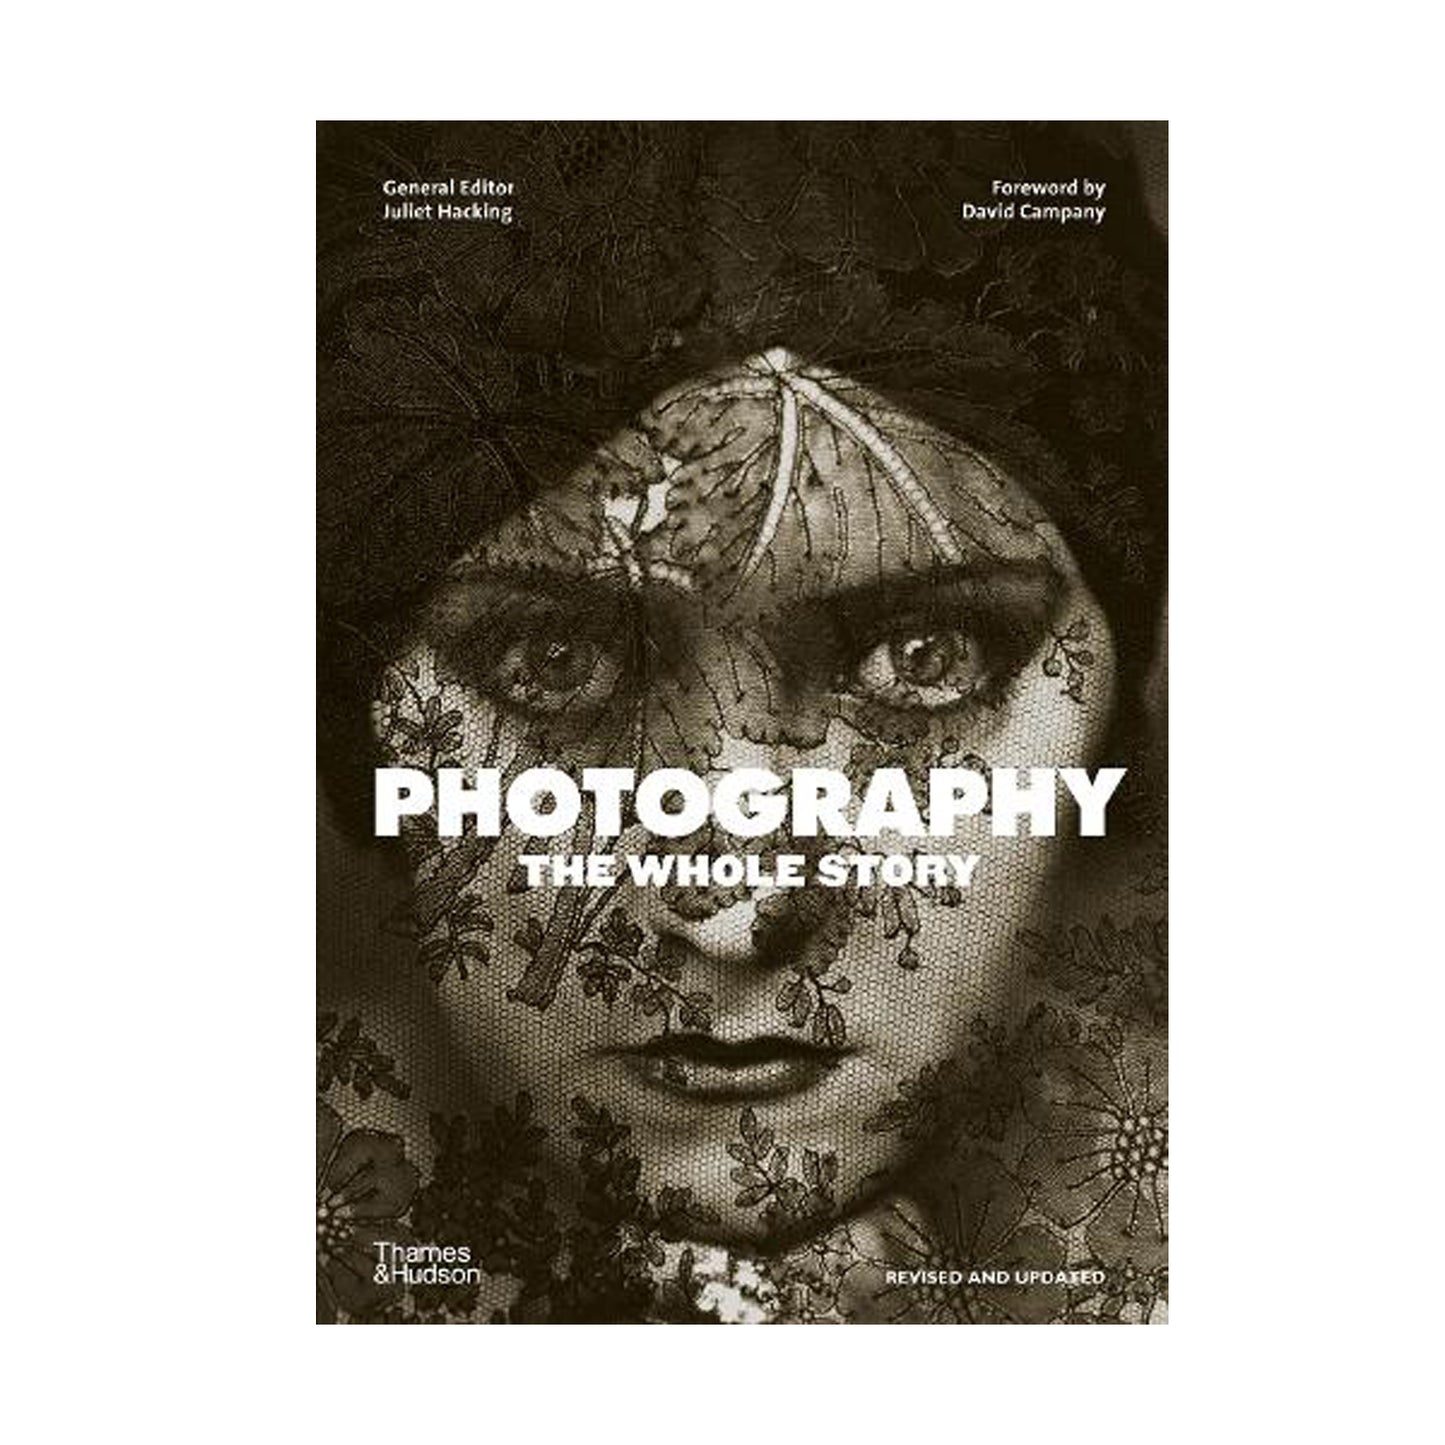 Photography: The Whole Story (Revised and Updated) by Juliet Hacking